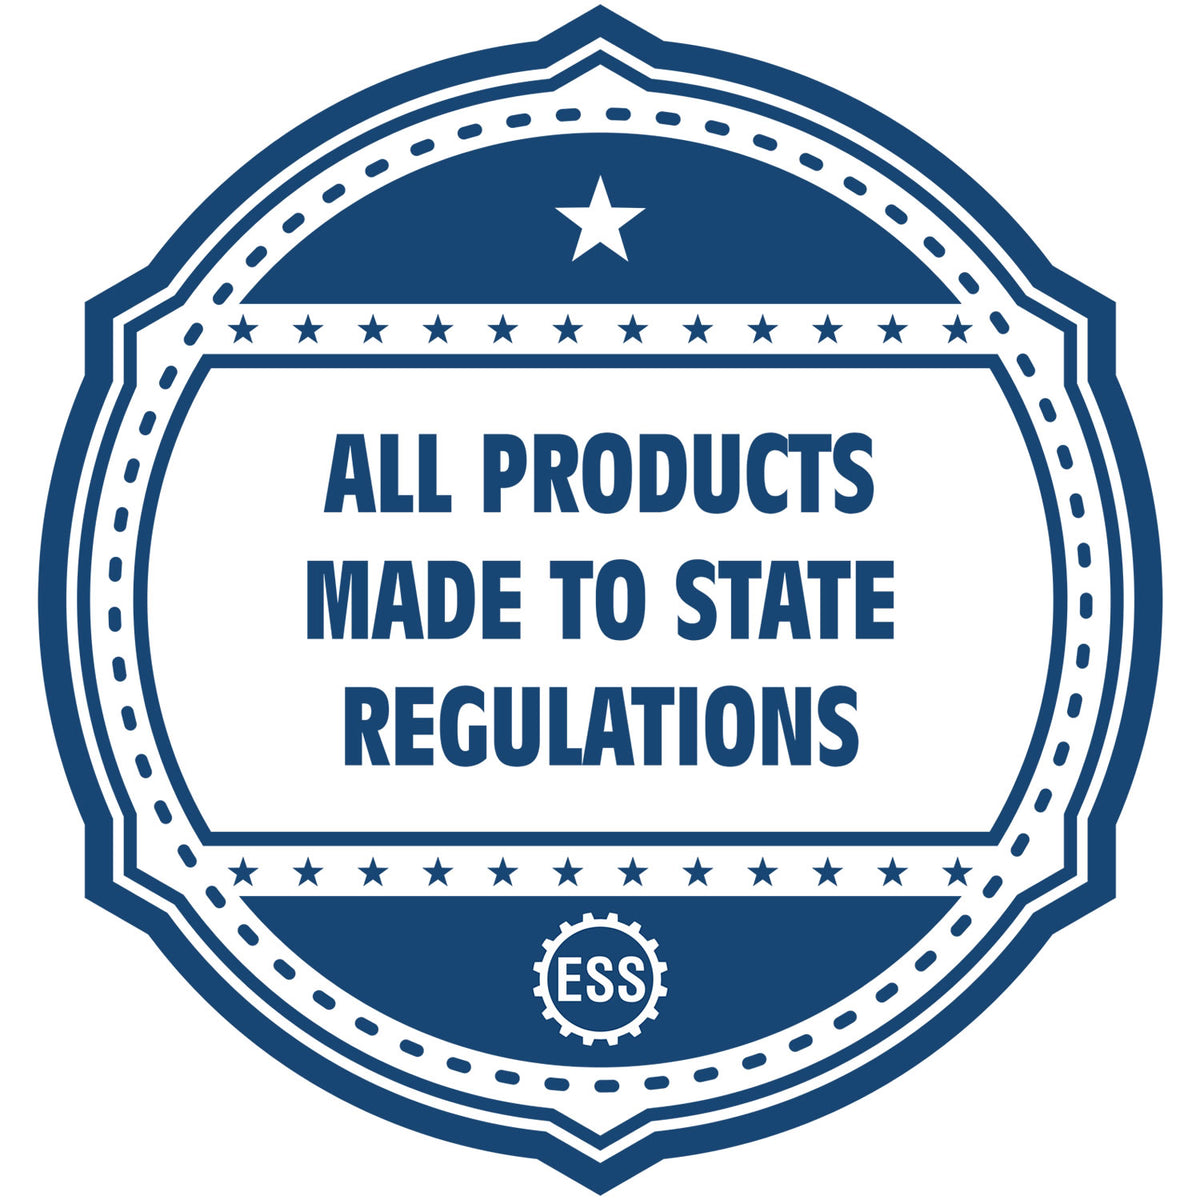 An icon or badge element for the Slim Pre-Inked Texas Landscape Architect Seal Stamp showing that this product is made in compliance with state regulations.